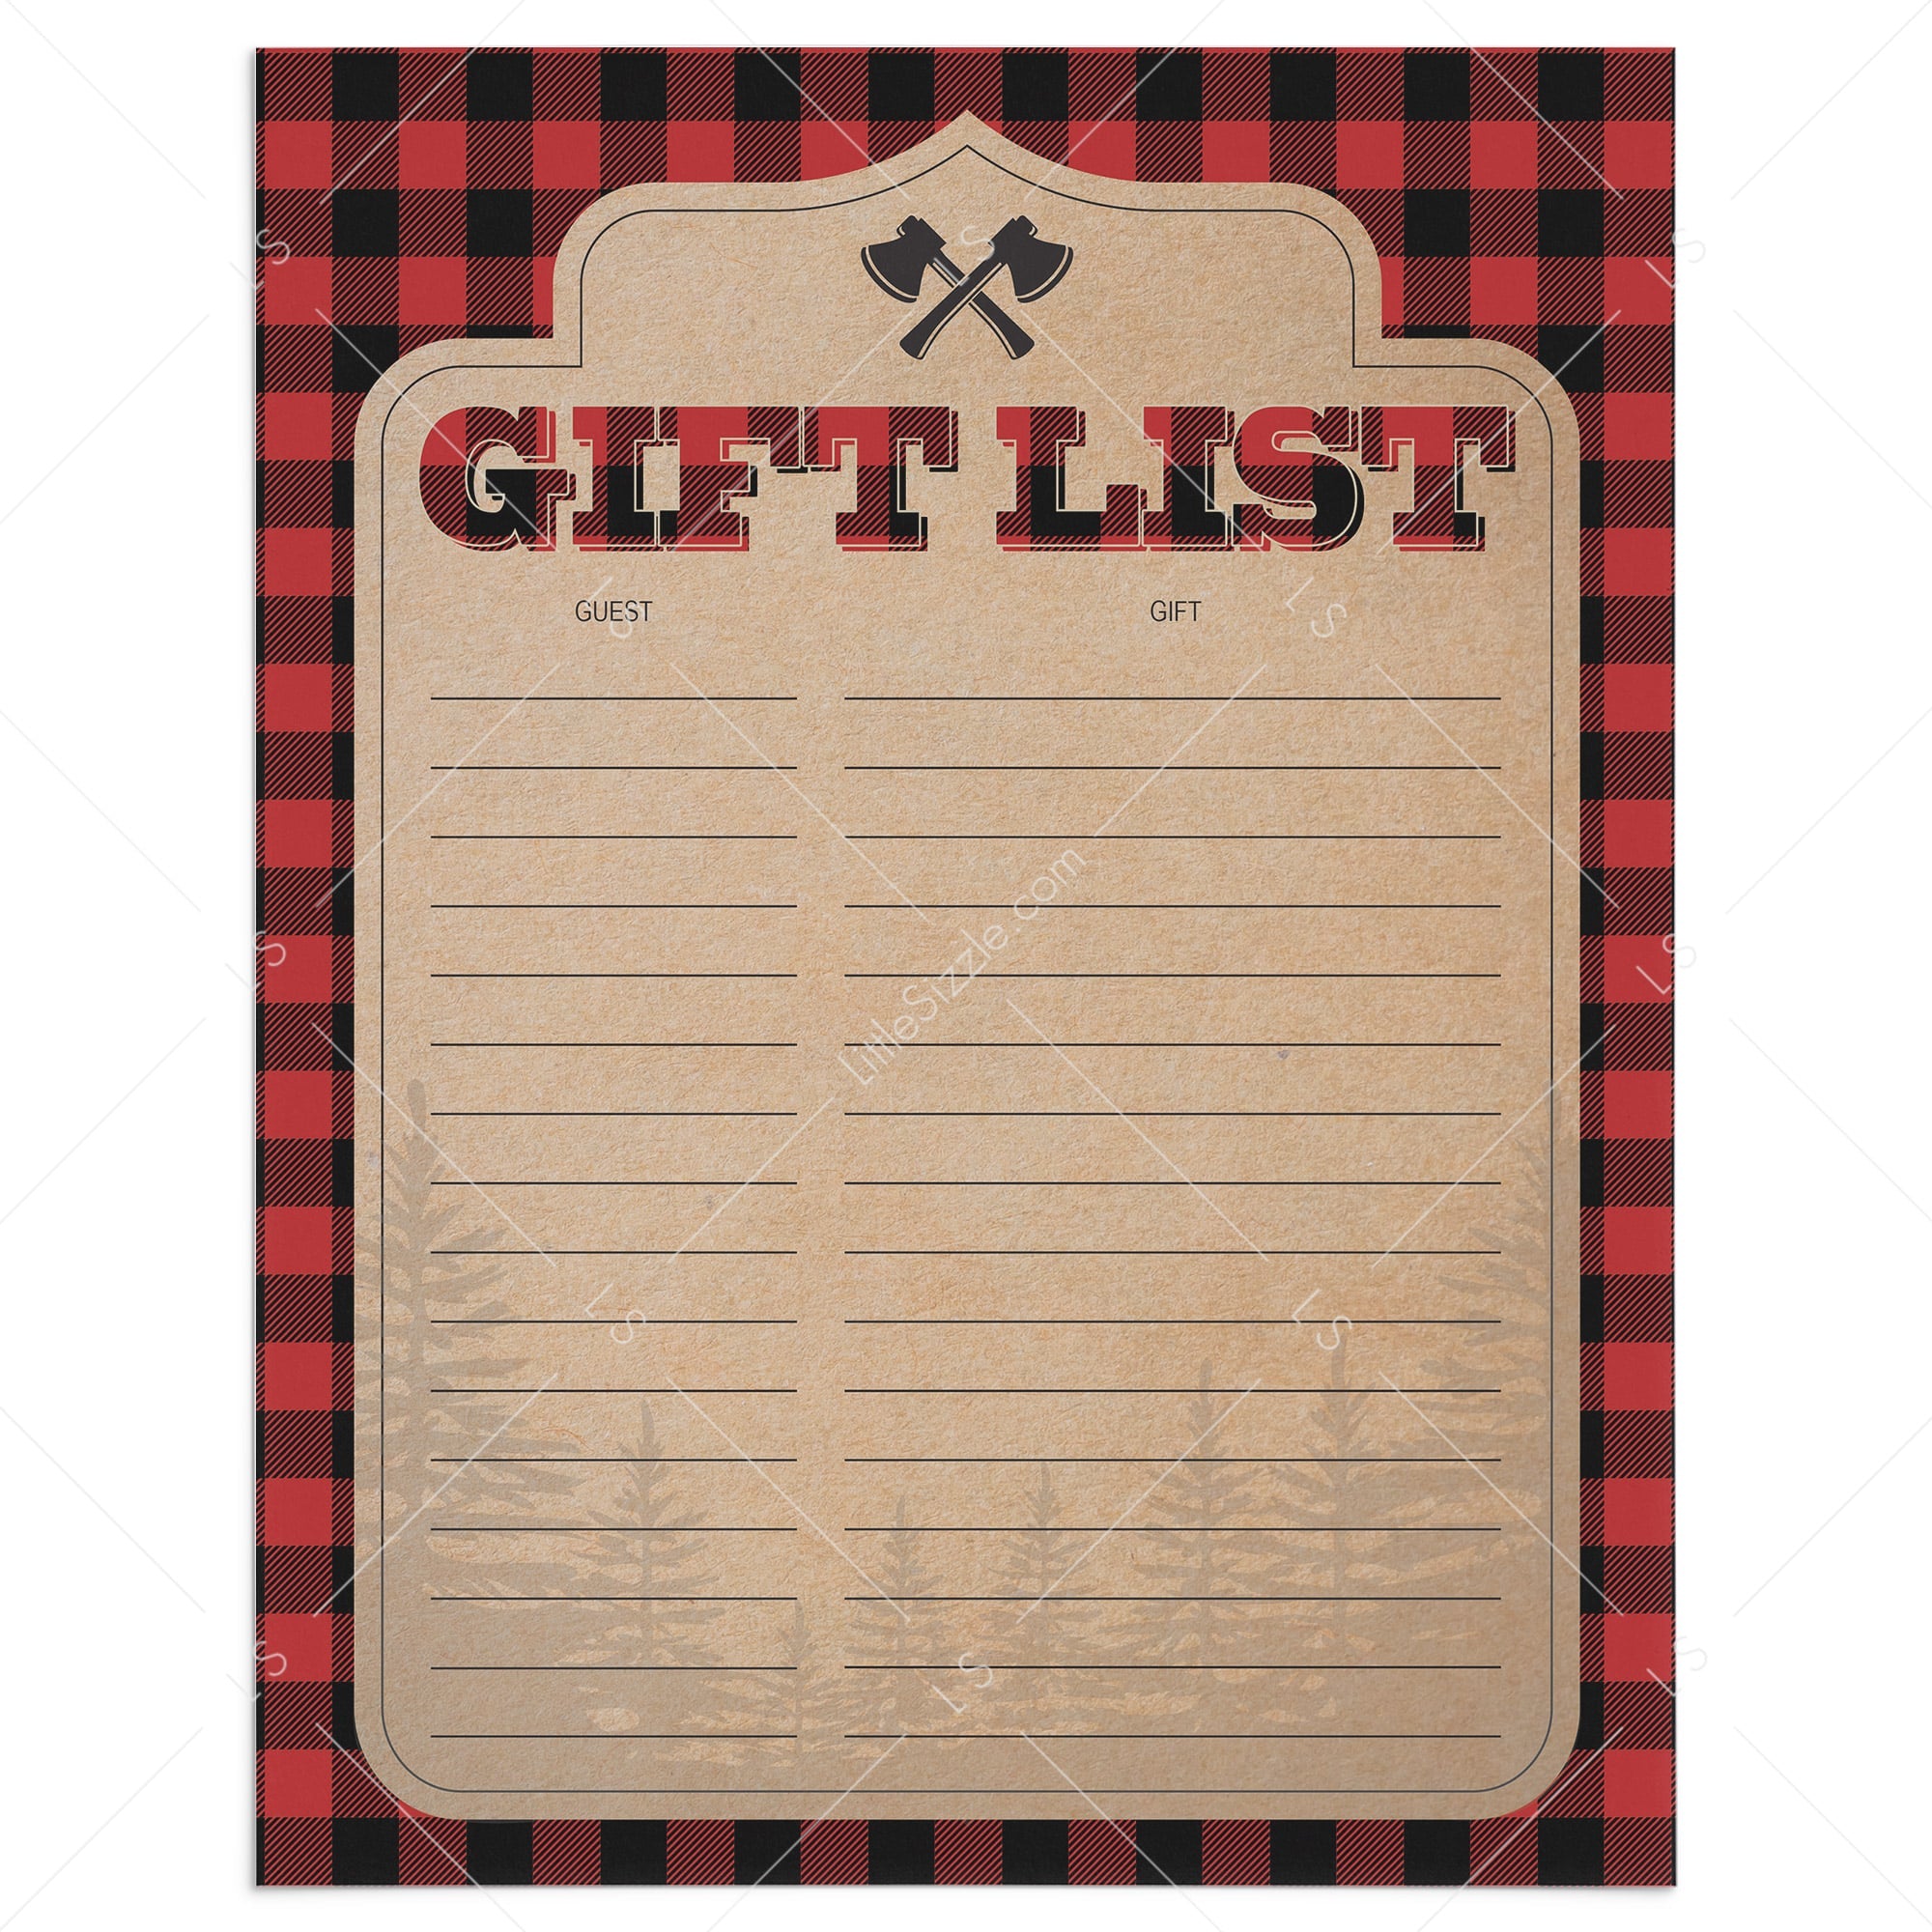 Rustic gift tracker for woodland party by LittleSizzle